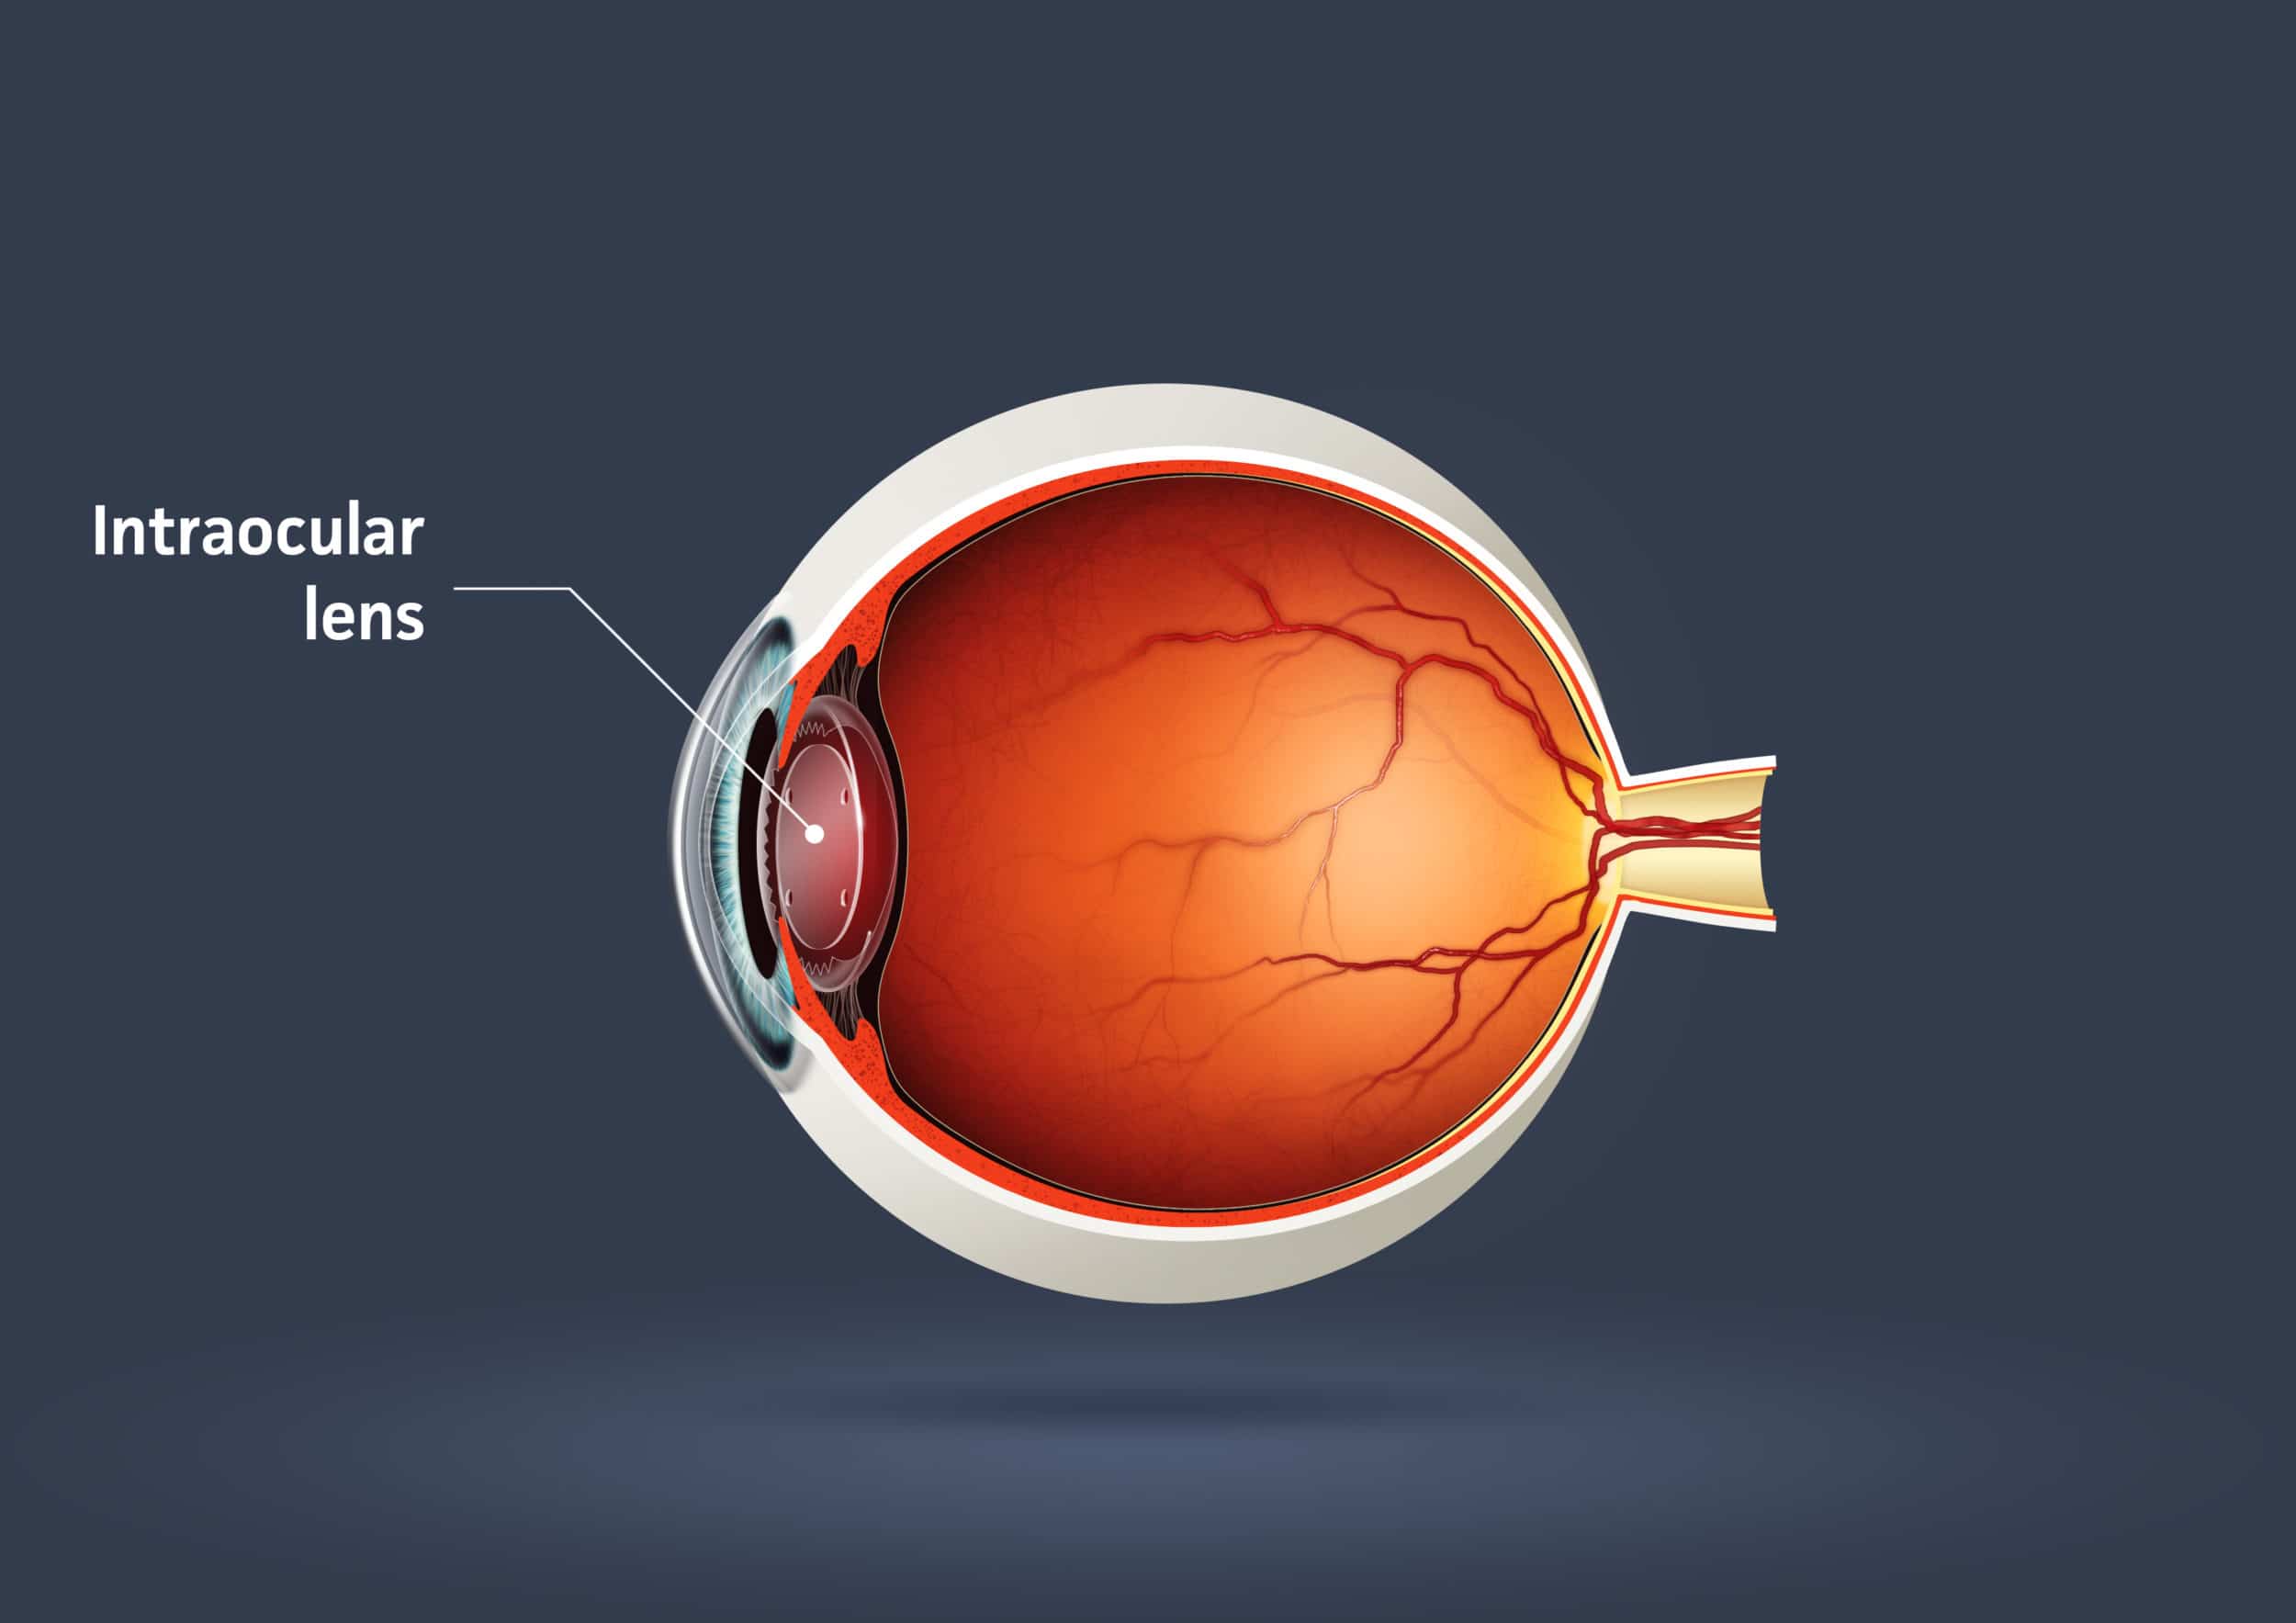 The anatomy of a human eyeball showing where an intraocular lens would be placed